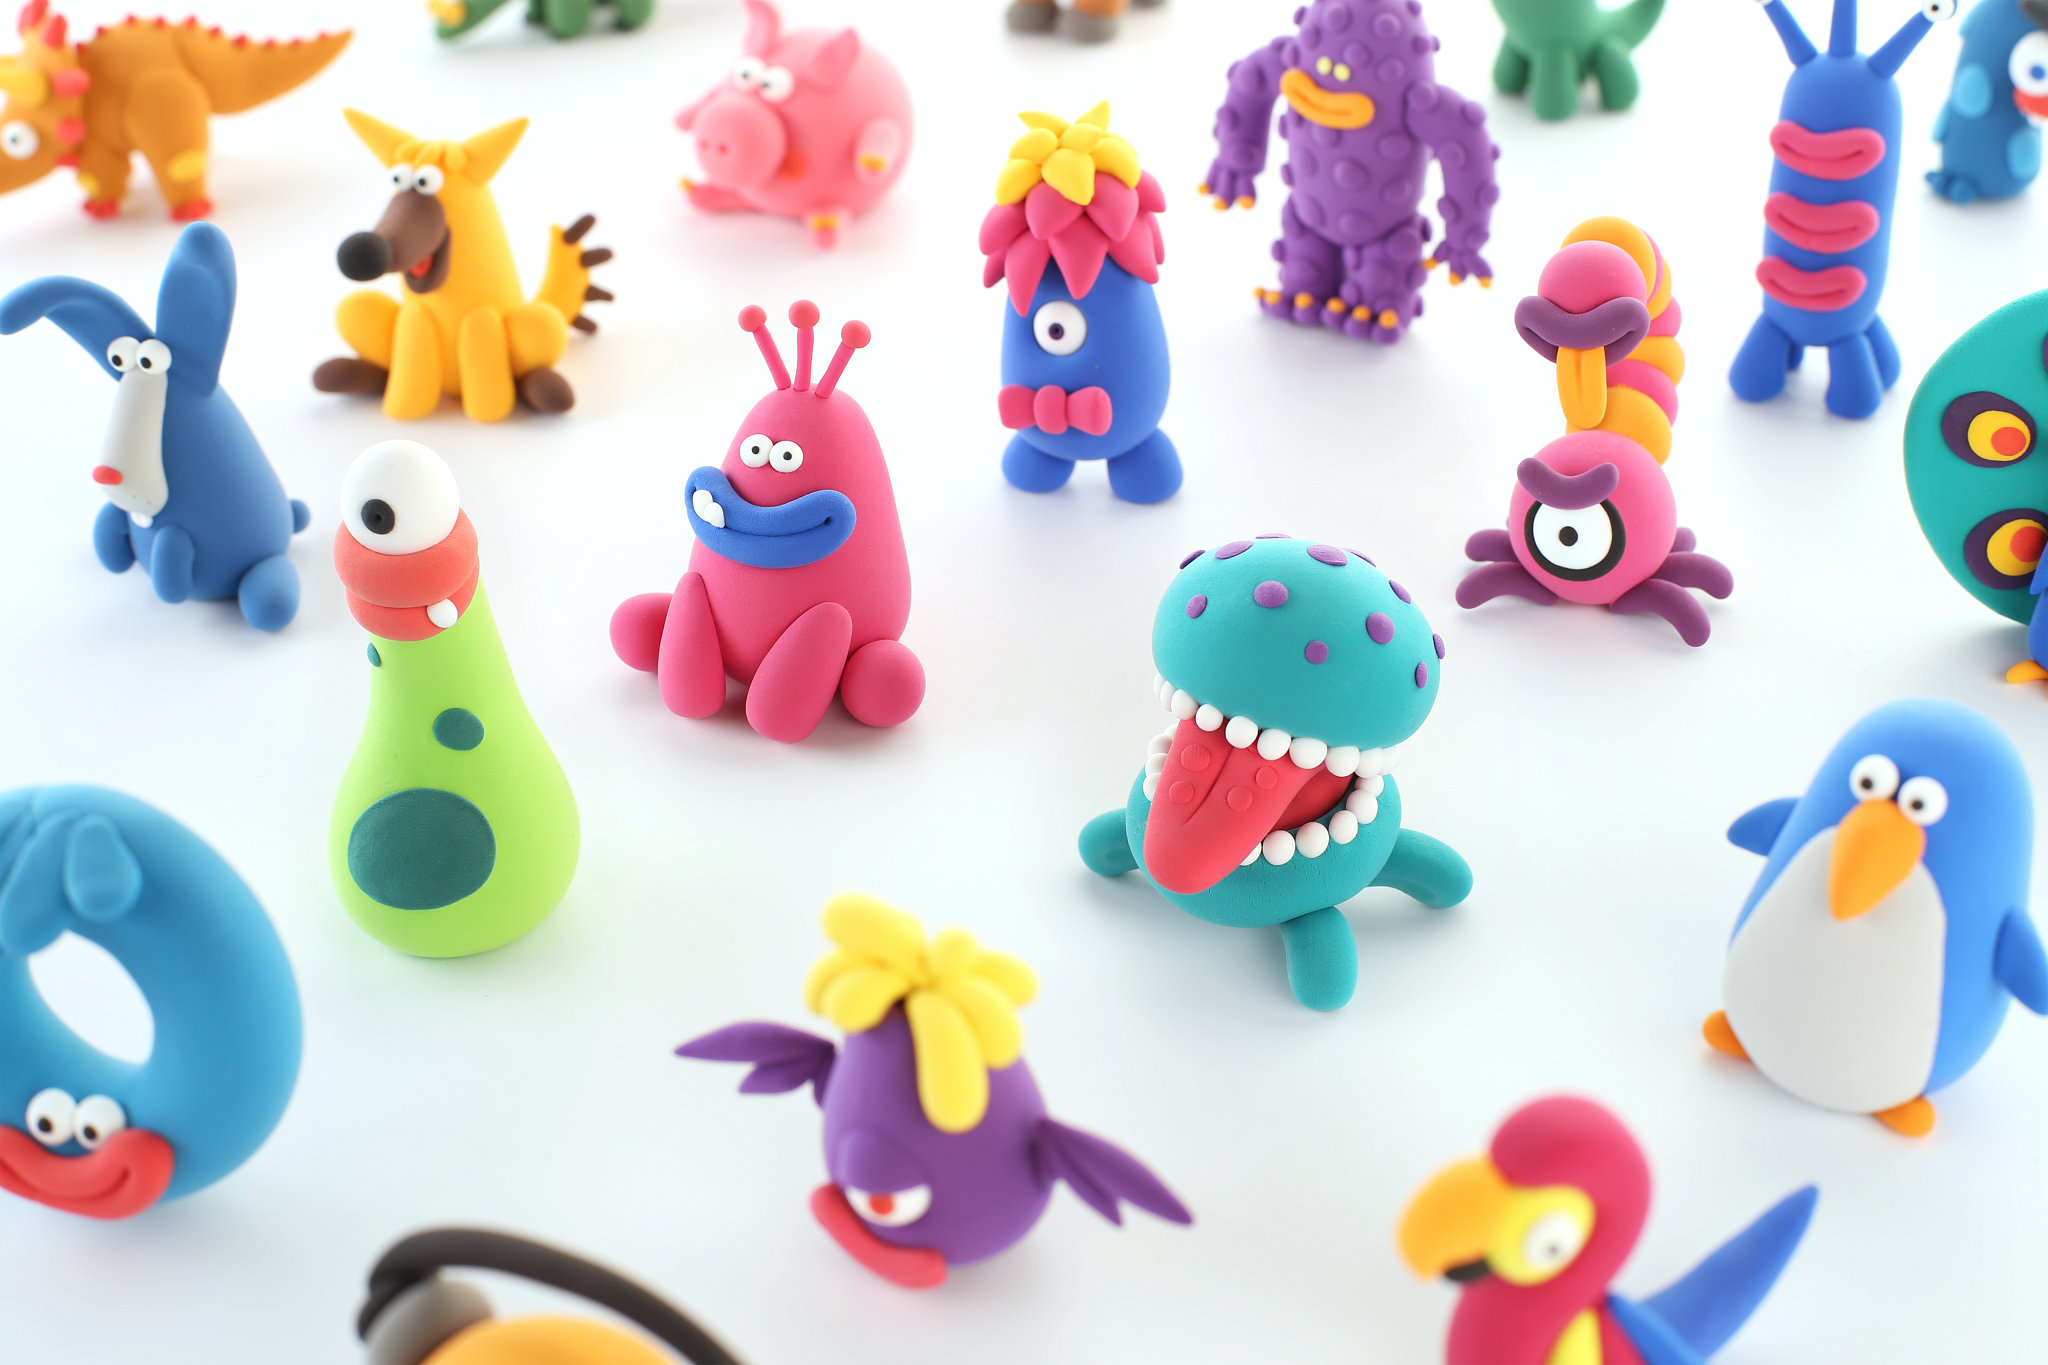 Hey Clay - Forest Animals - Imagination Toys